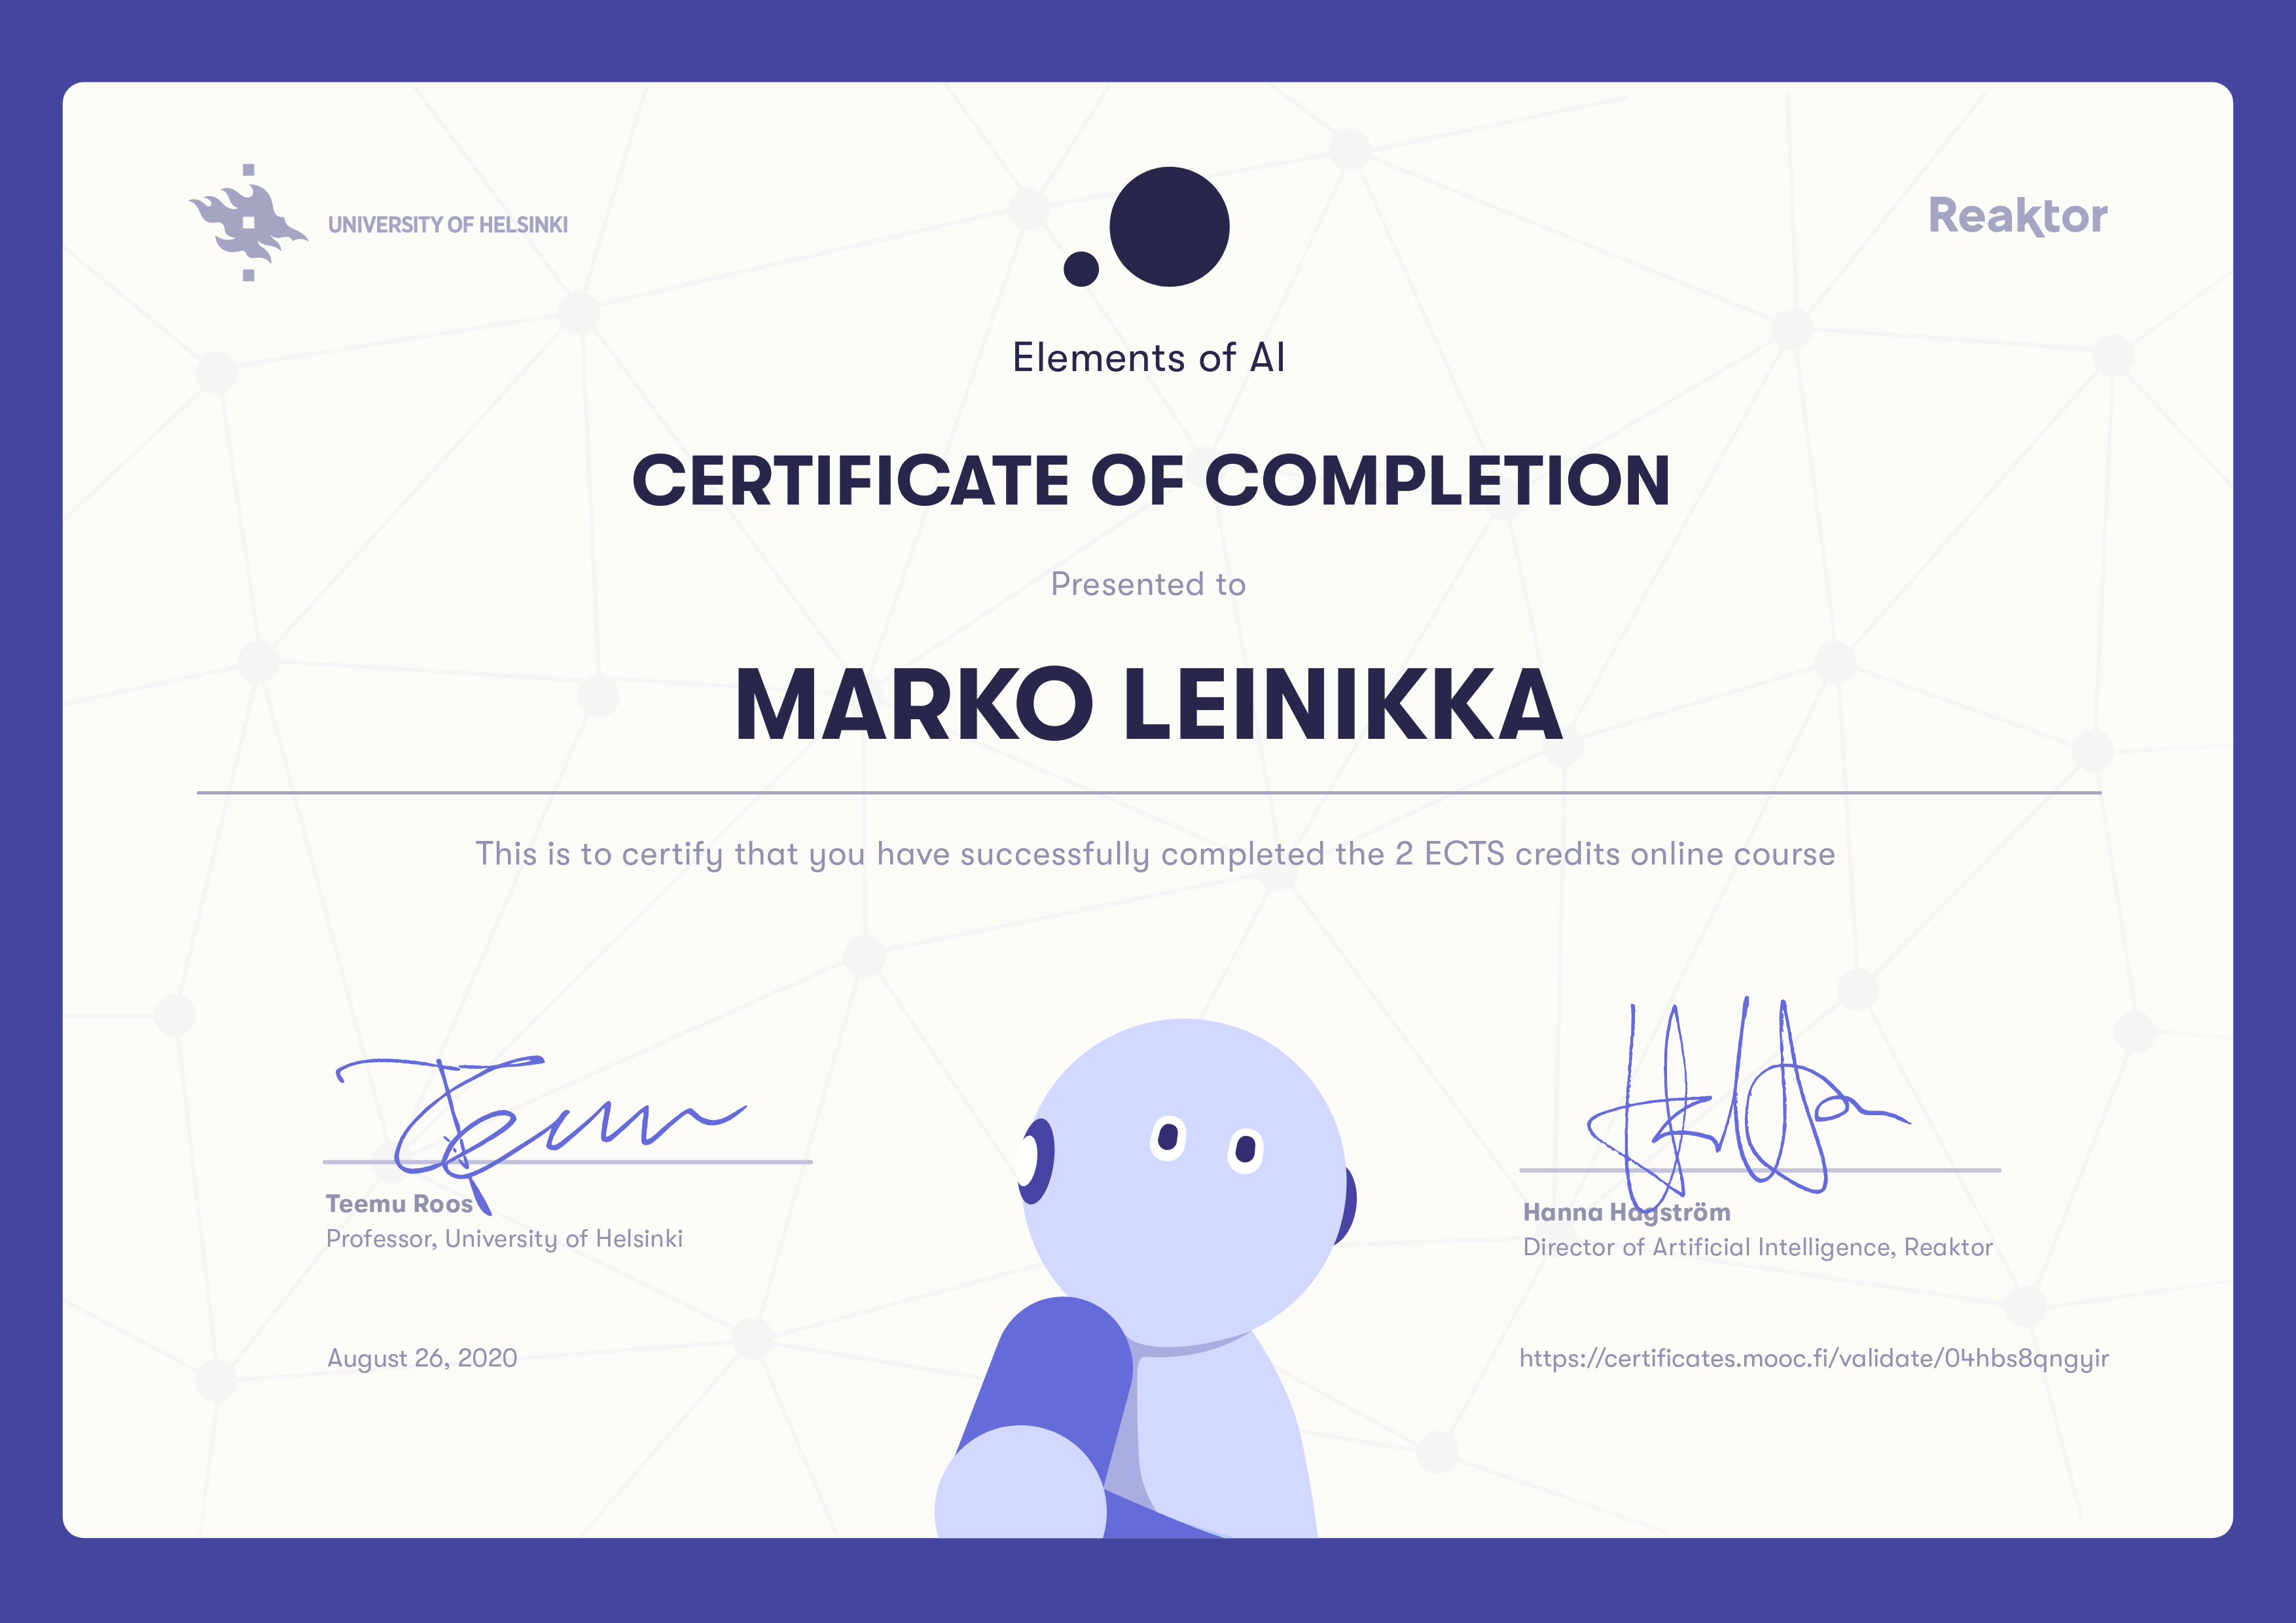 Elements of AI course certificate